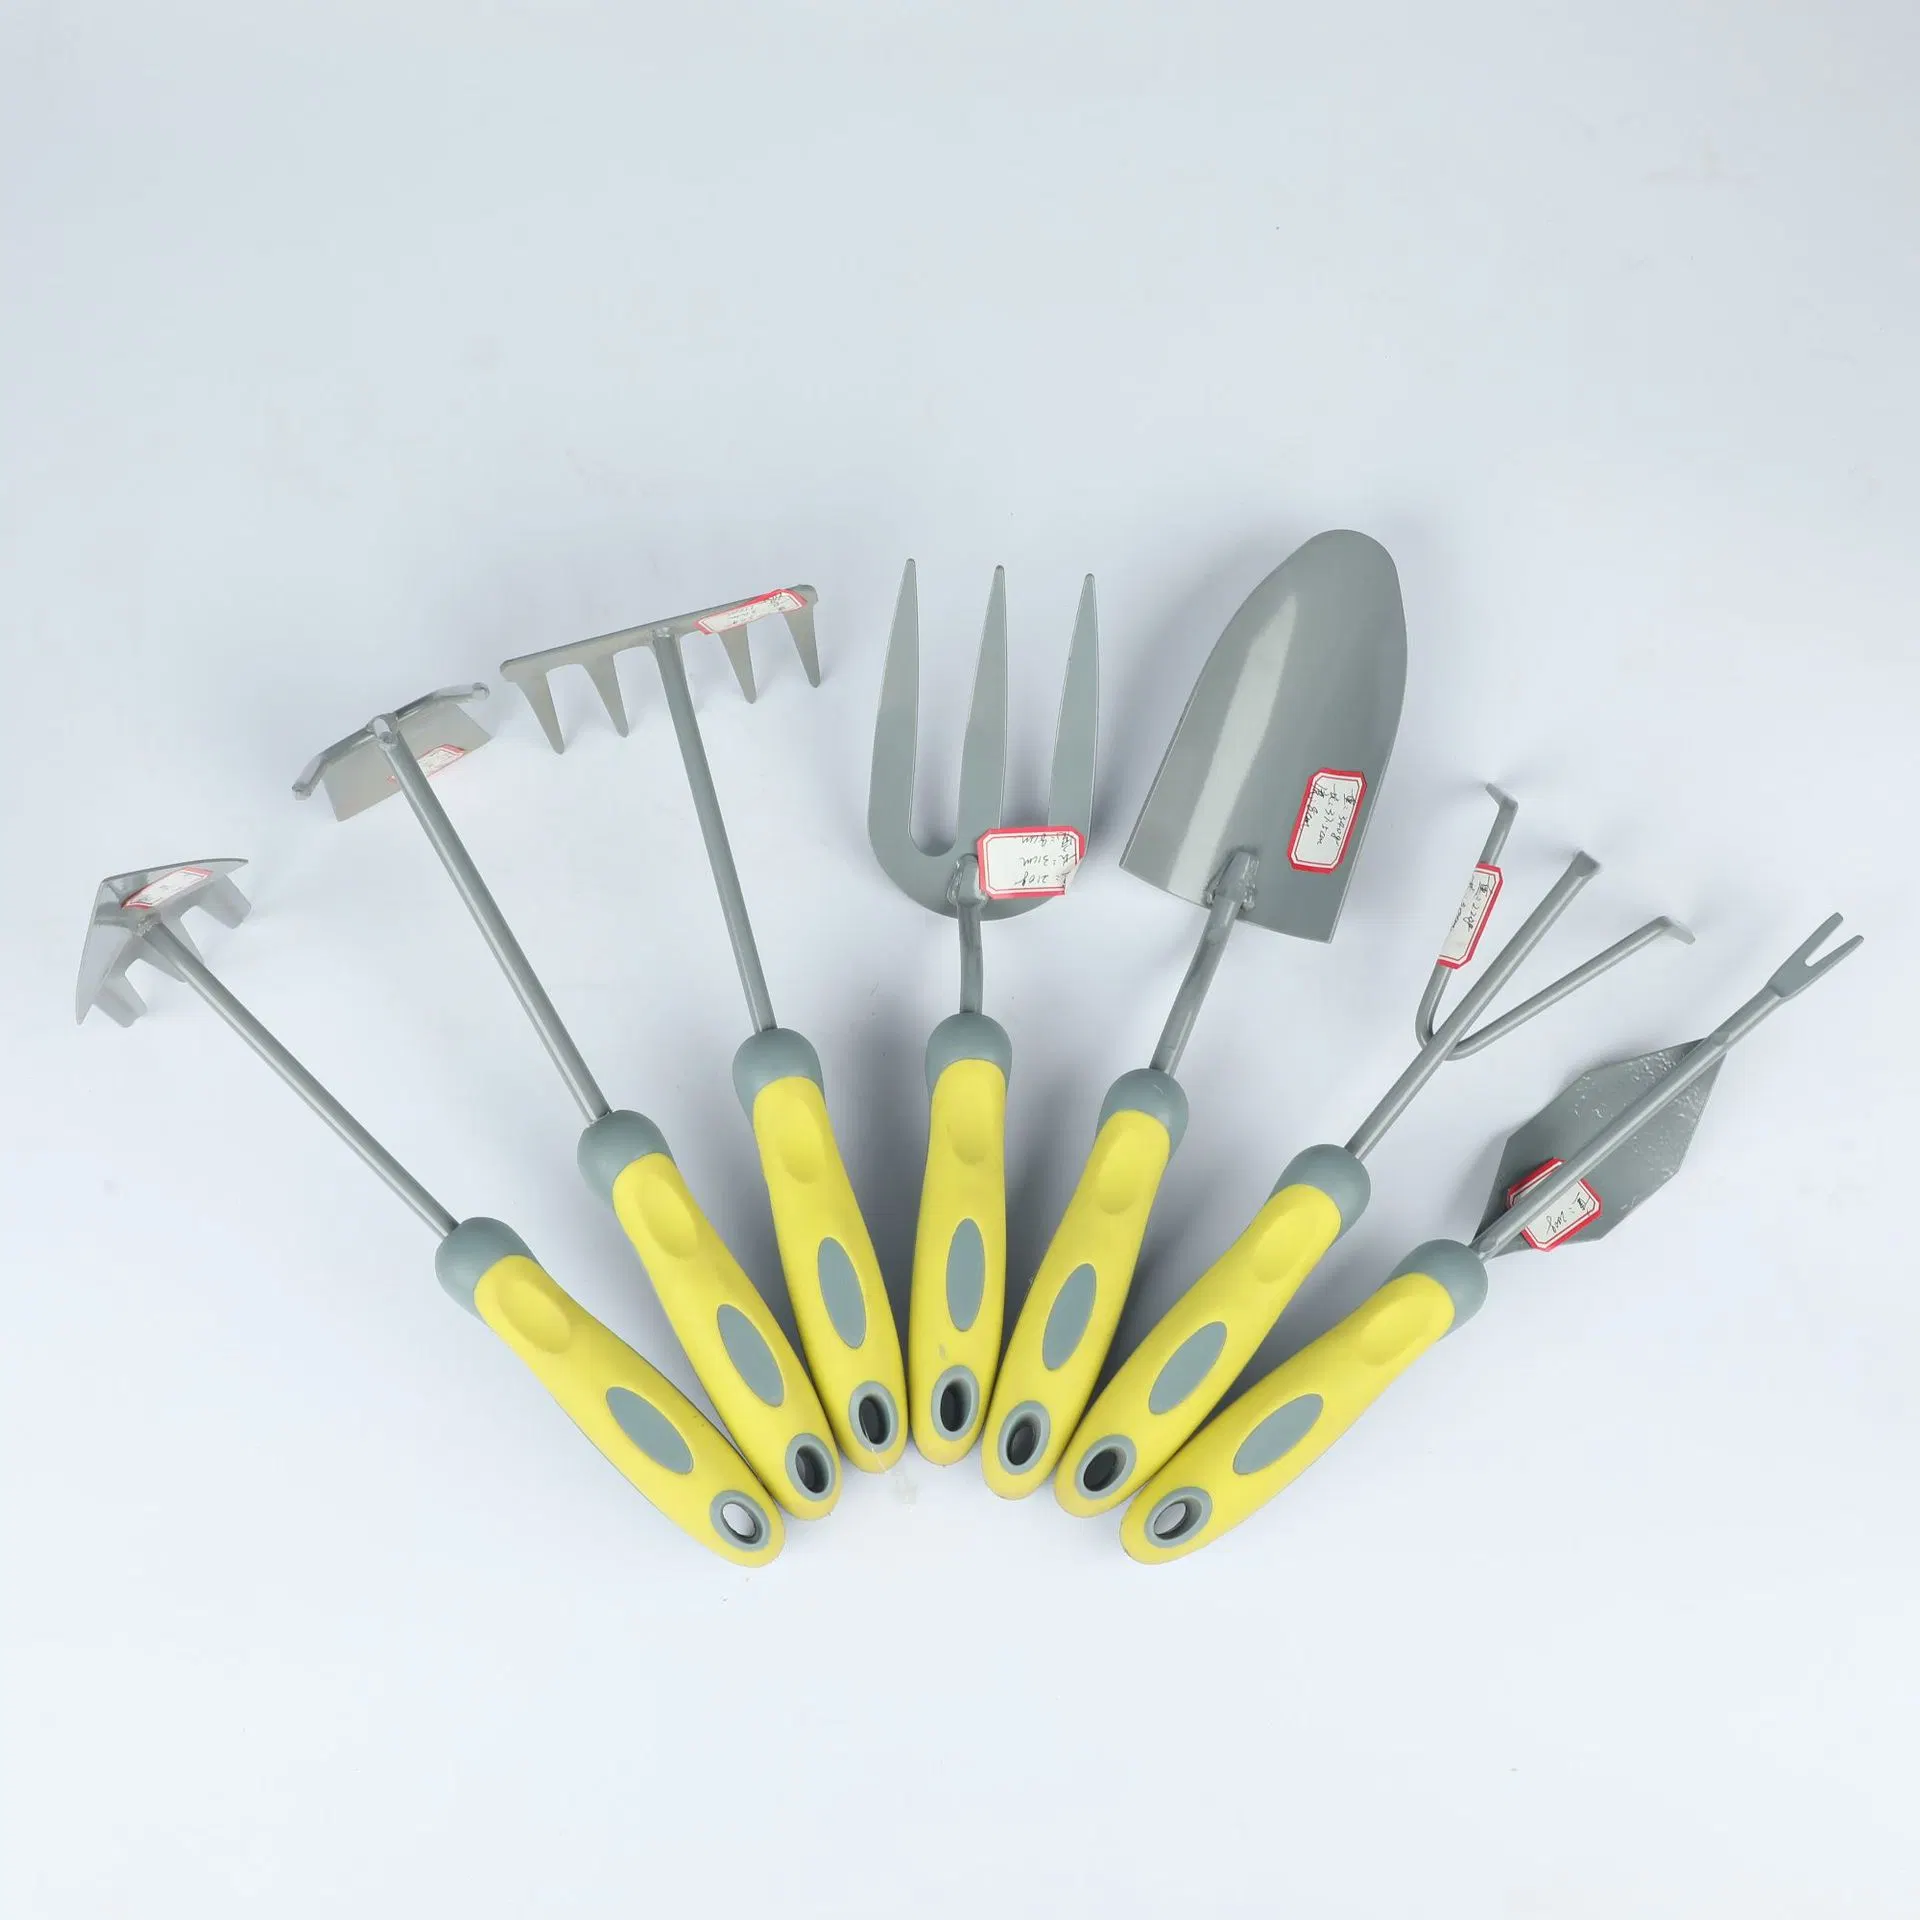 China Professional Planting Flower Vegetable Heavy Duty Hand Garden Small Tools Set